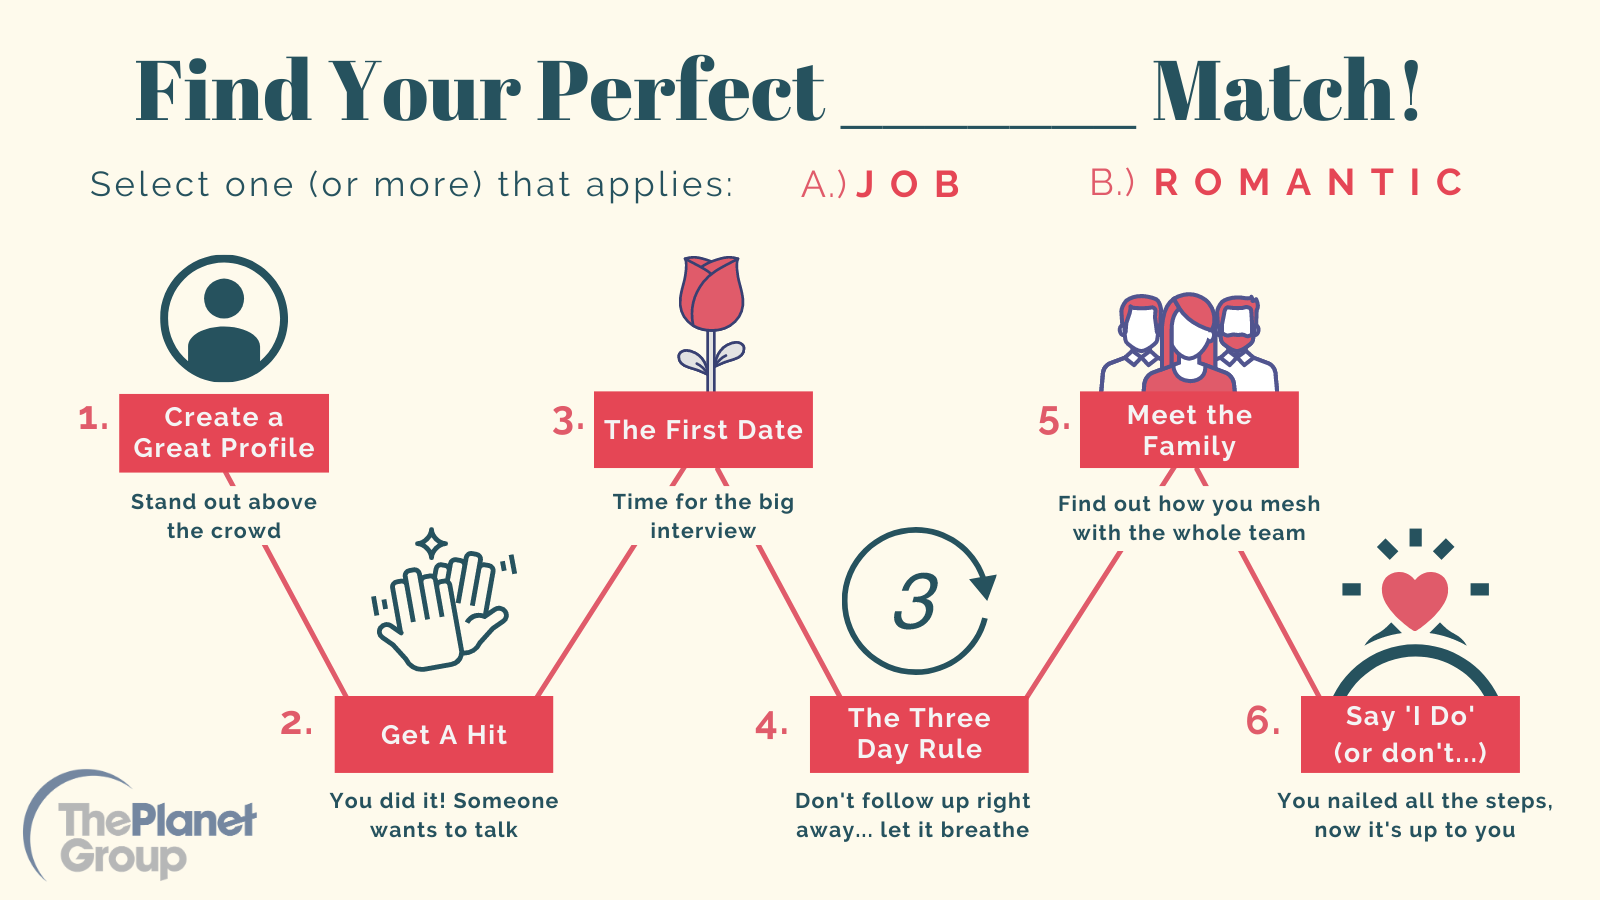 infographic showing how to find your perfect match